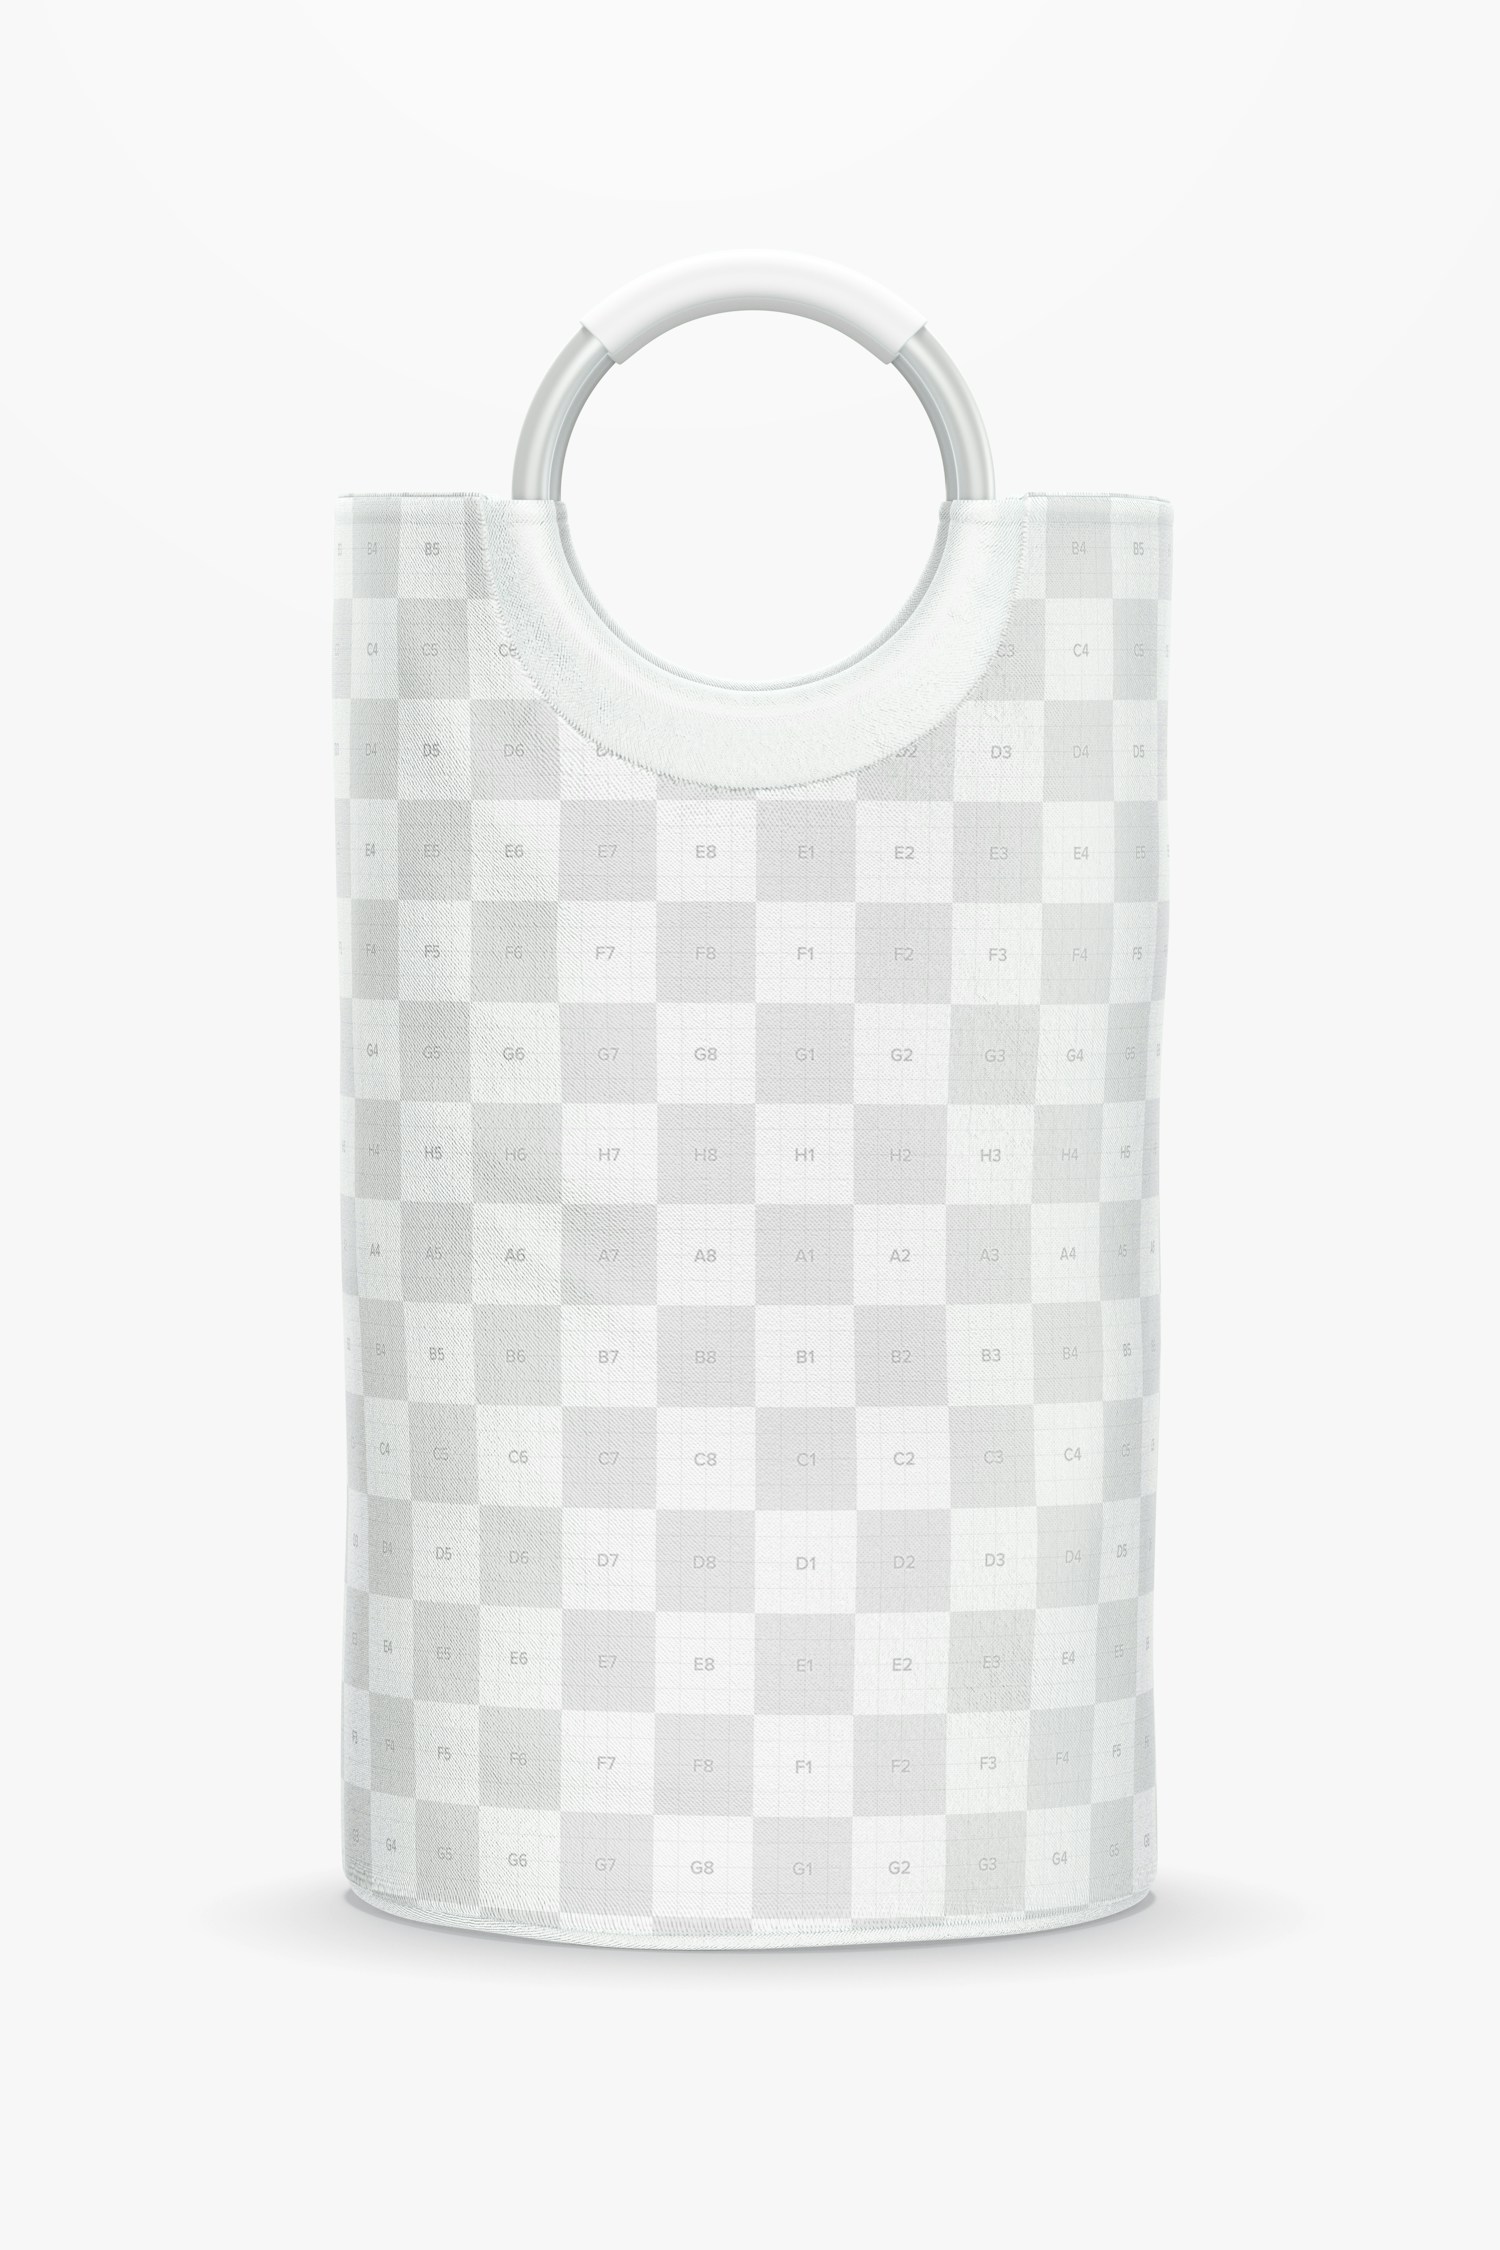 Laundry Basket Mockup, Front View